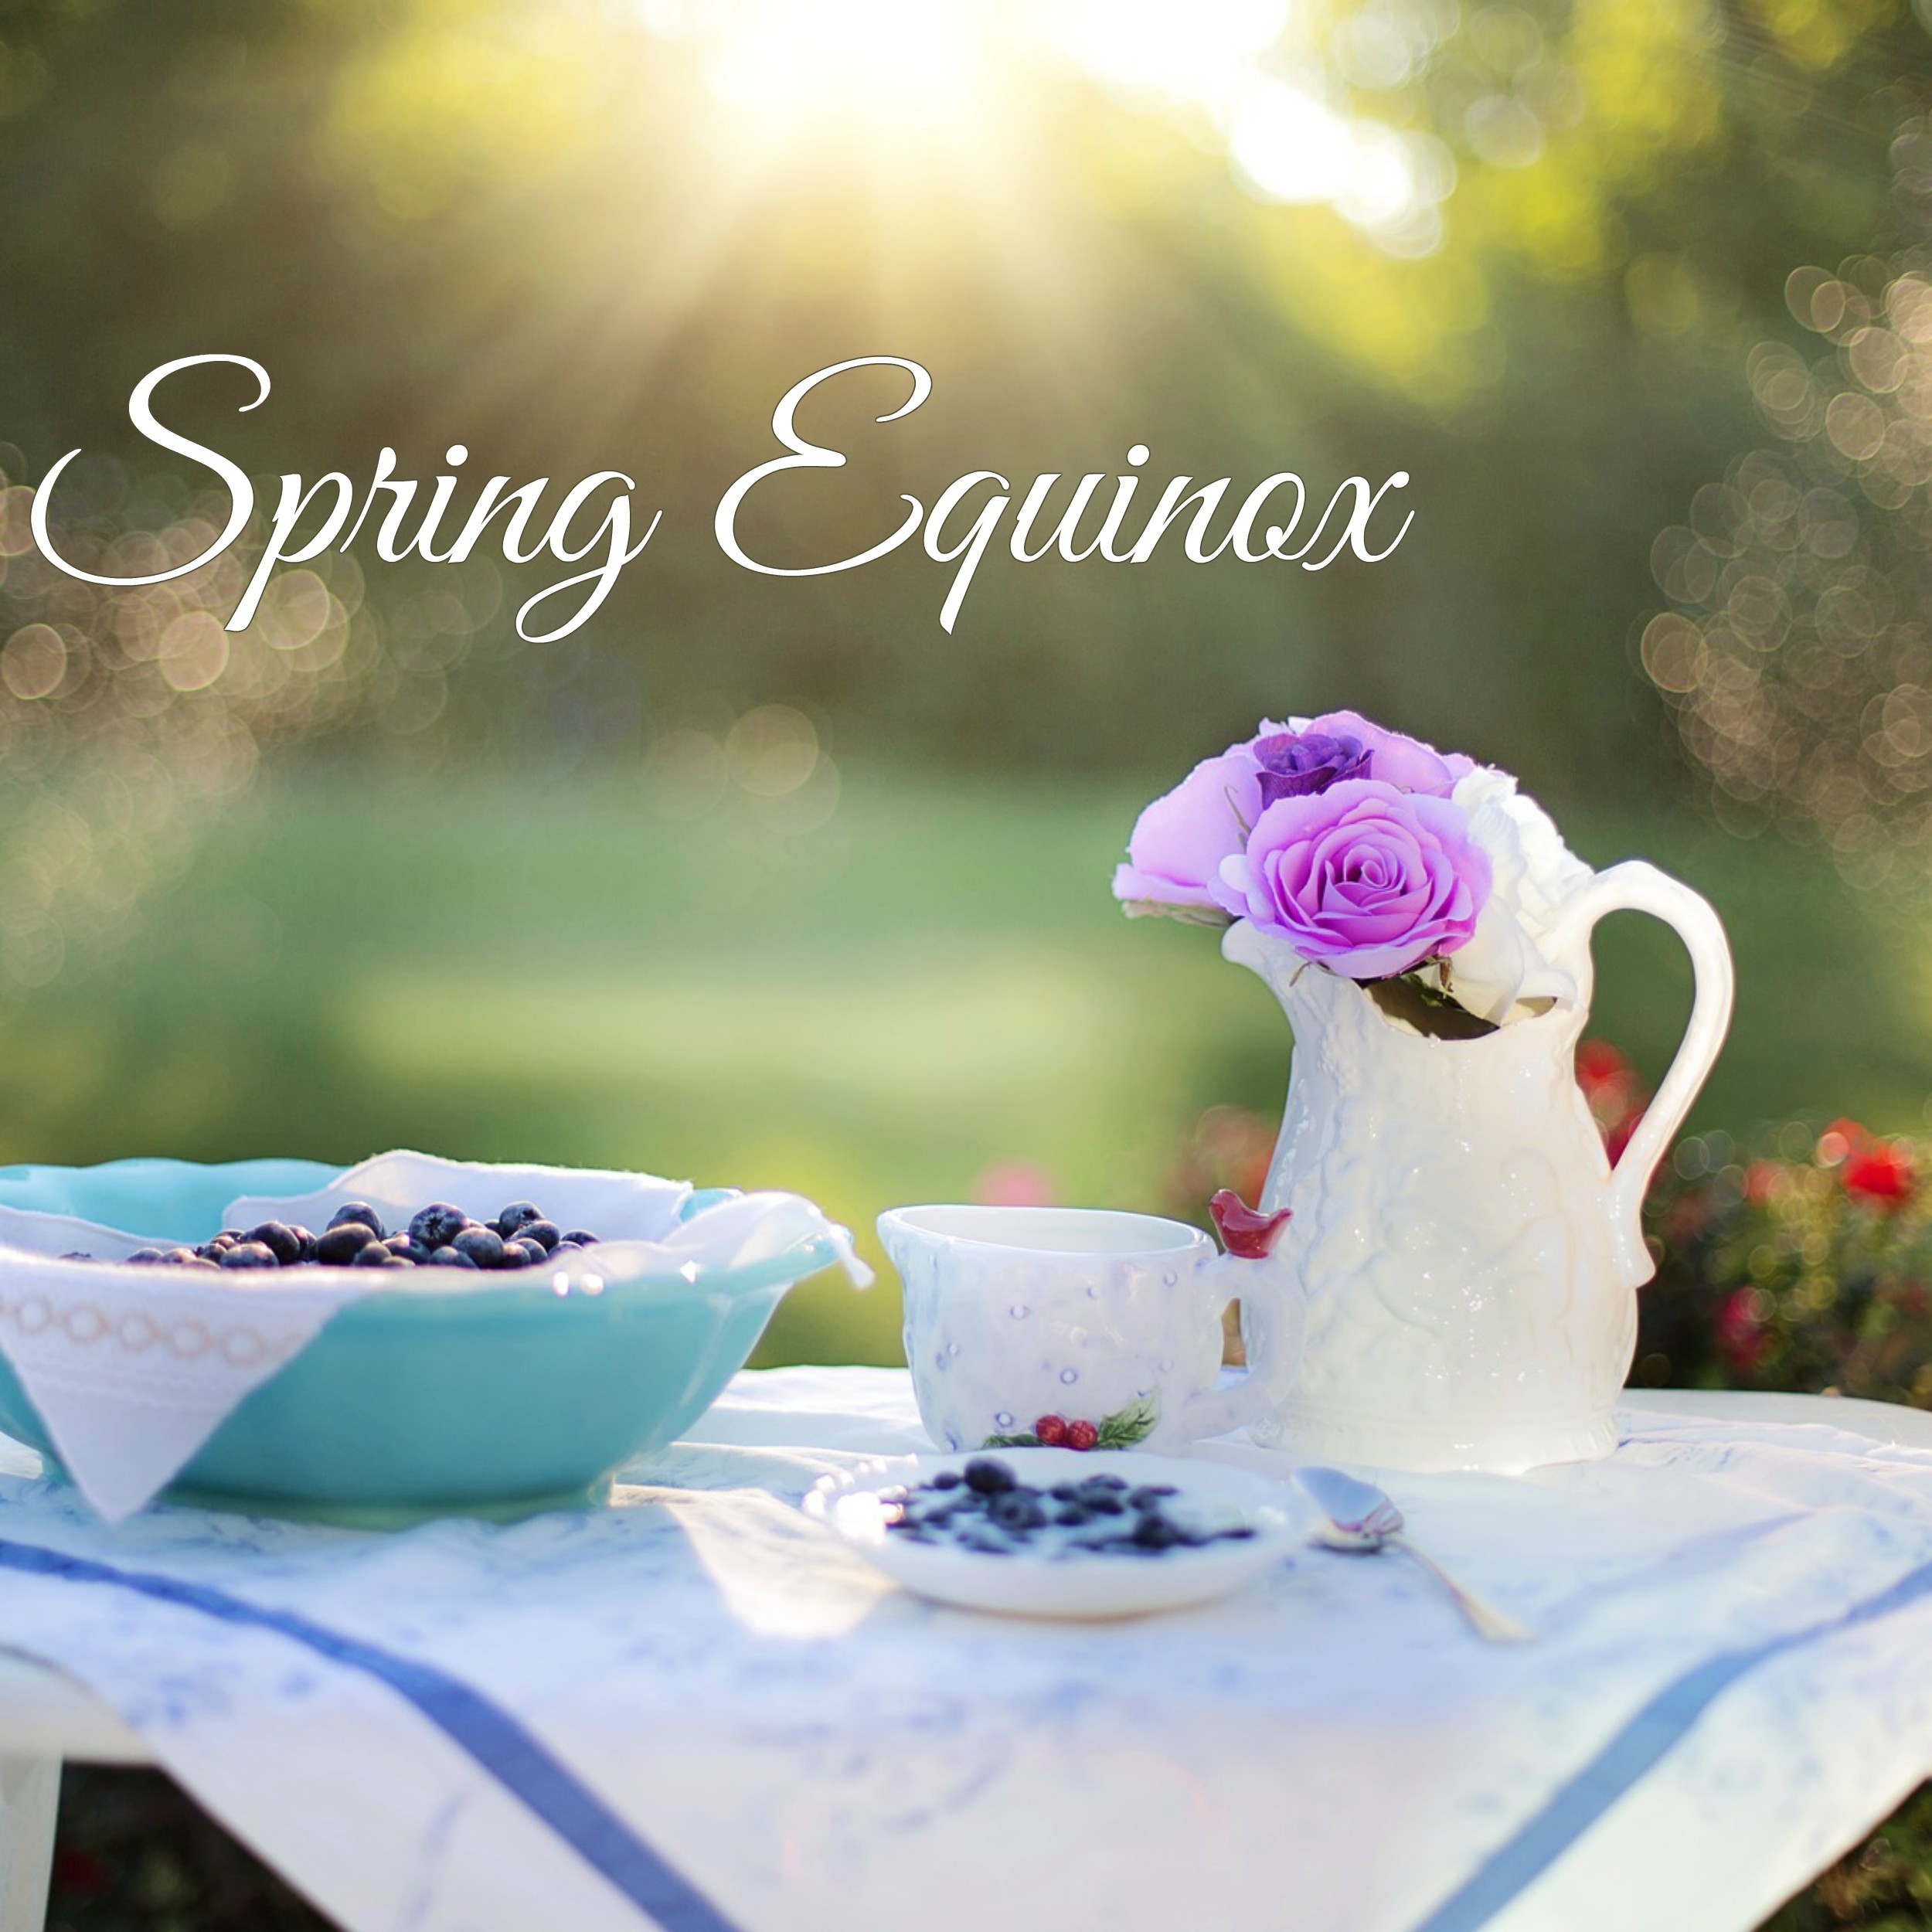 Spring Equinox  Welcome Spring Nature Sounds and Soft Peaceful Songs for Awakening